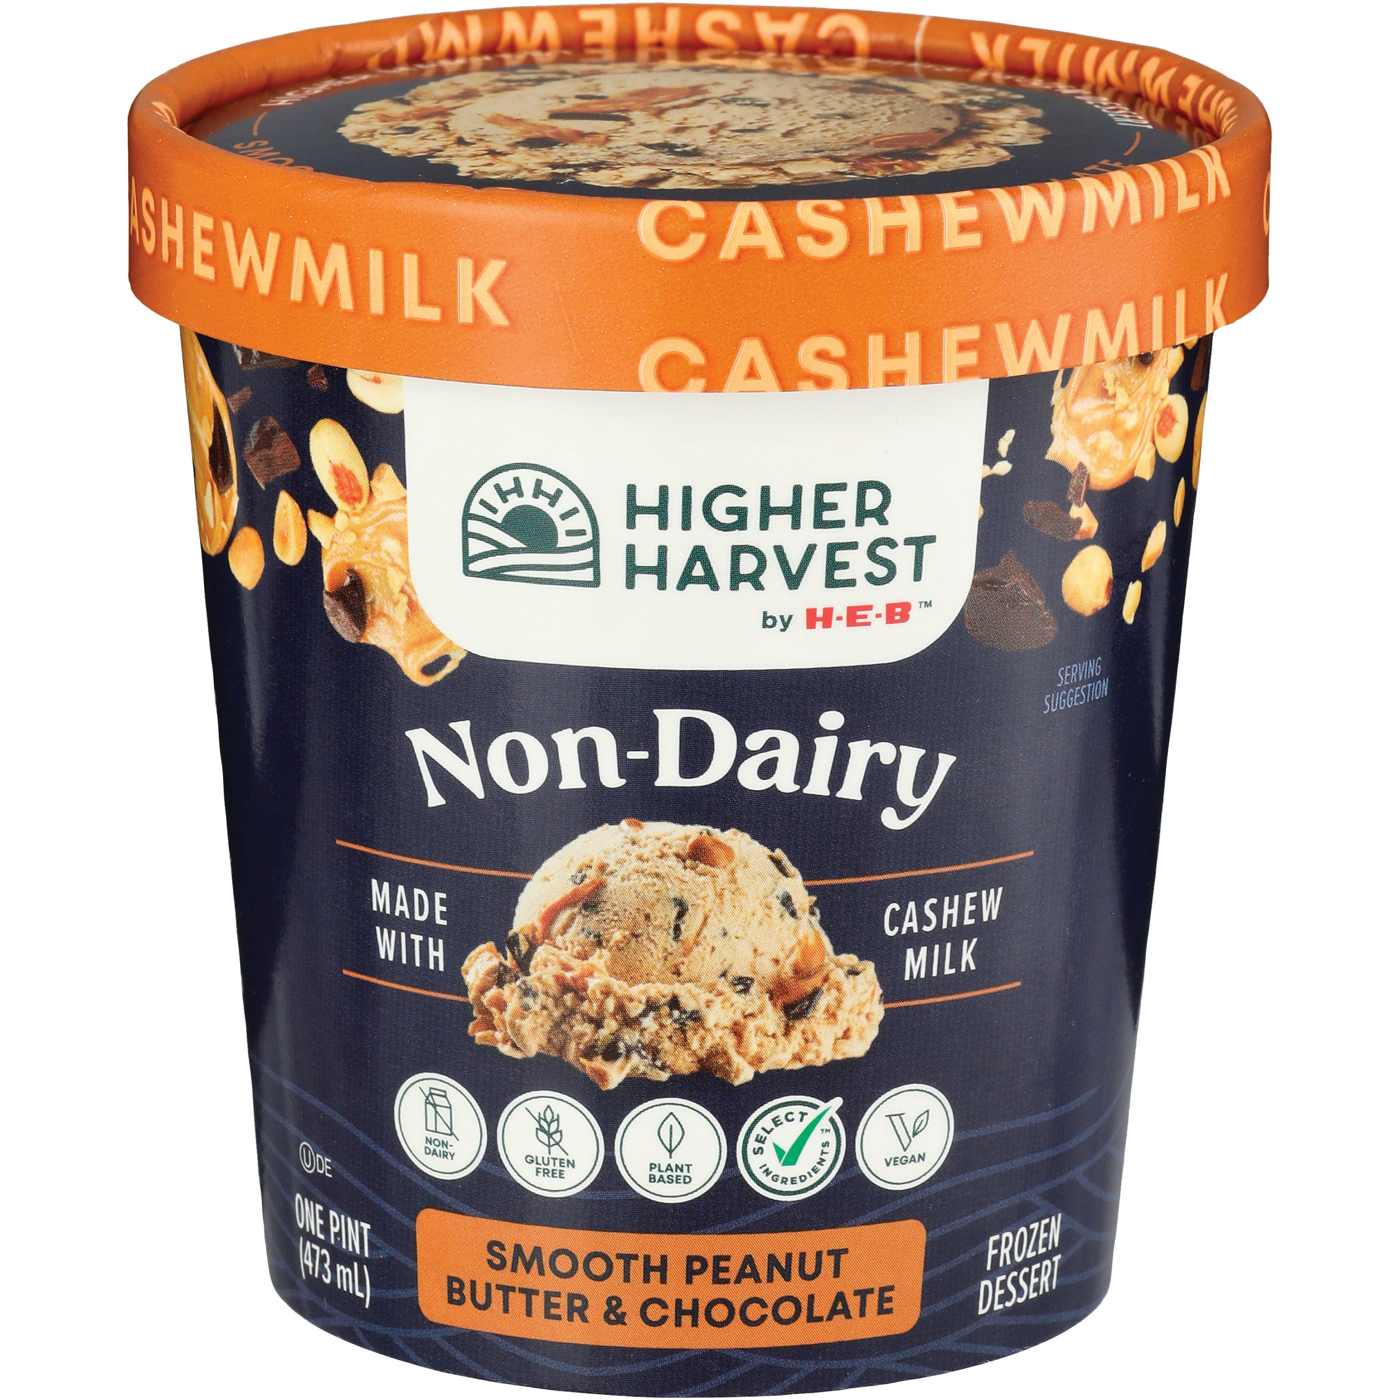 Higher Harvest by H-E-B Non-Dairy Frozen Dessert - Smooth Peanut Butter & Chocolate; image 1 of 2